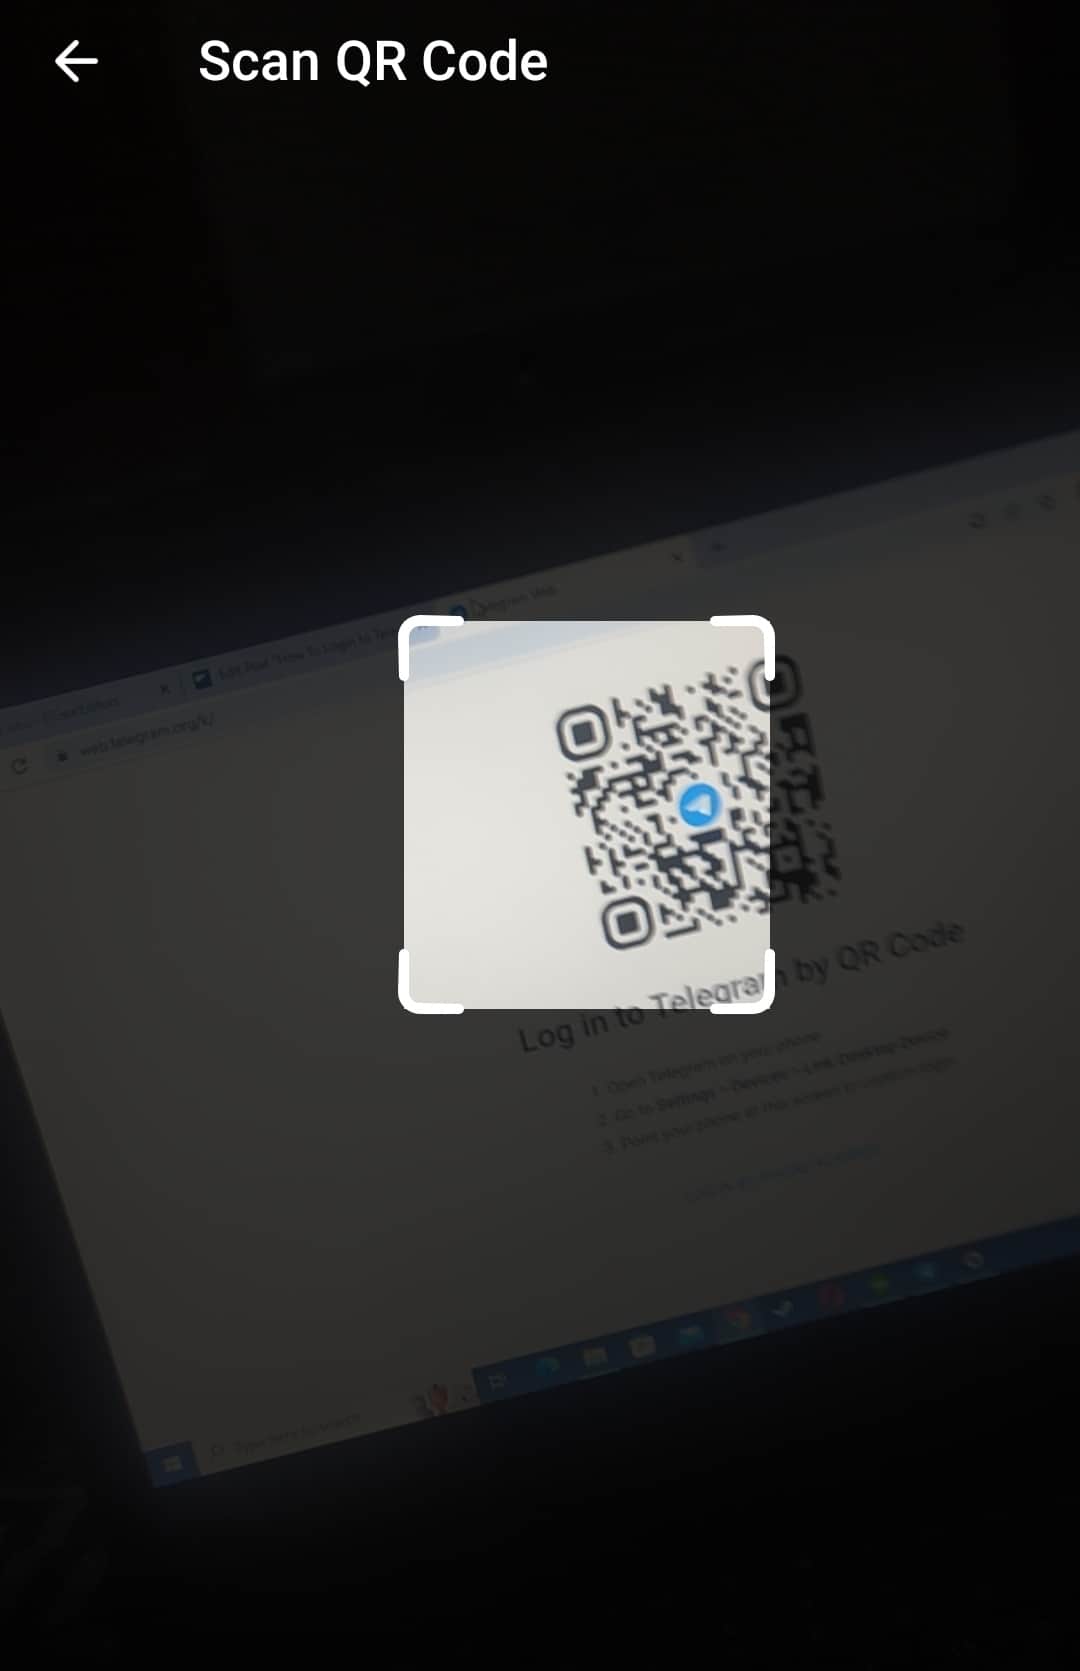 Scan The Displayed Qr Code